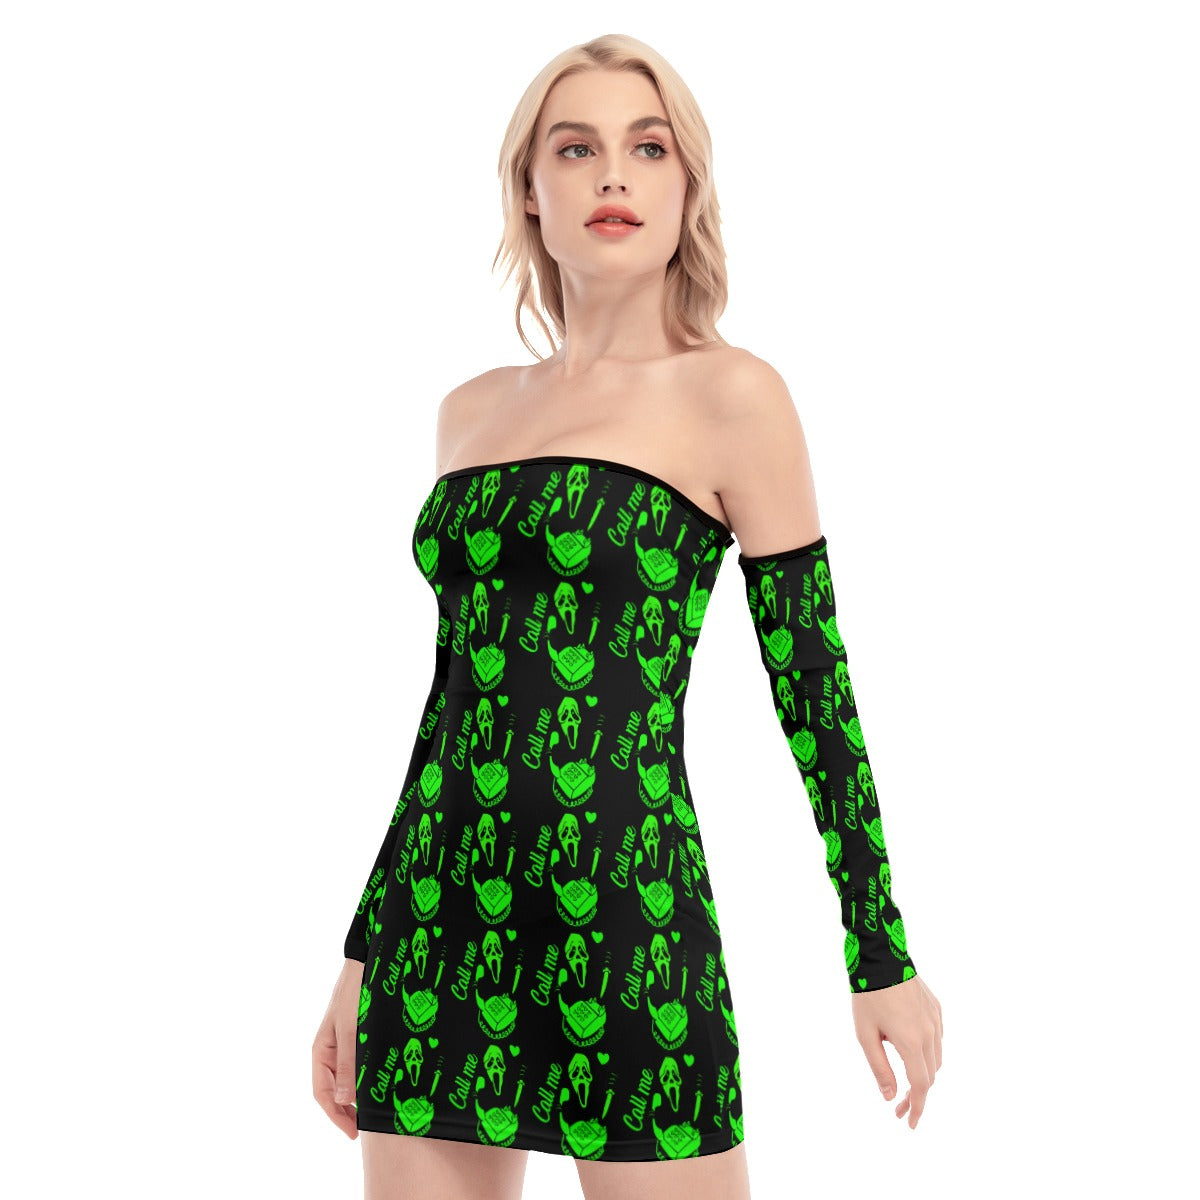 Neon Green Ghostface Back Lace-up Dress spookydoll